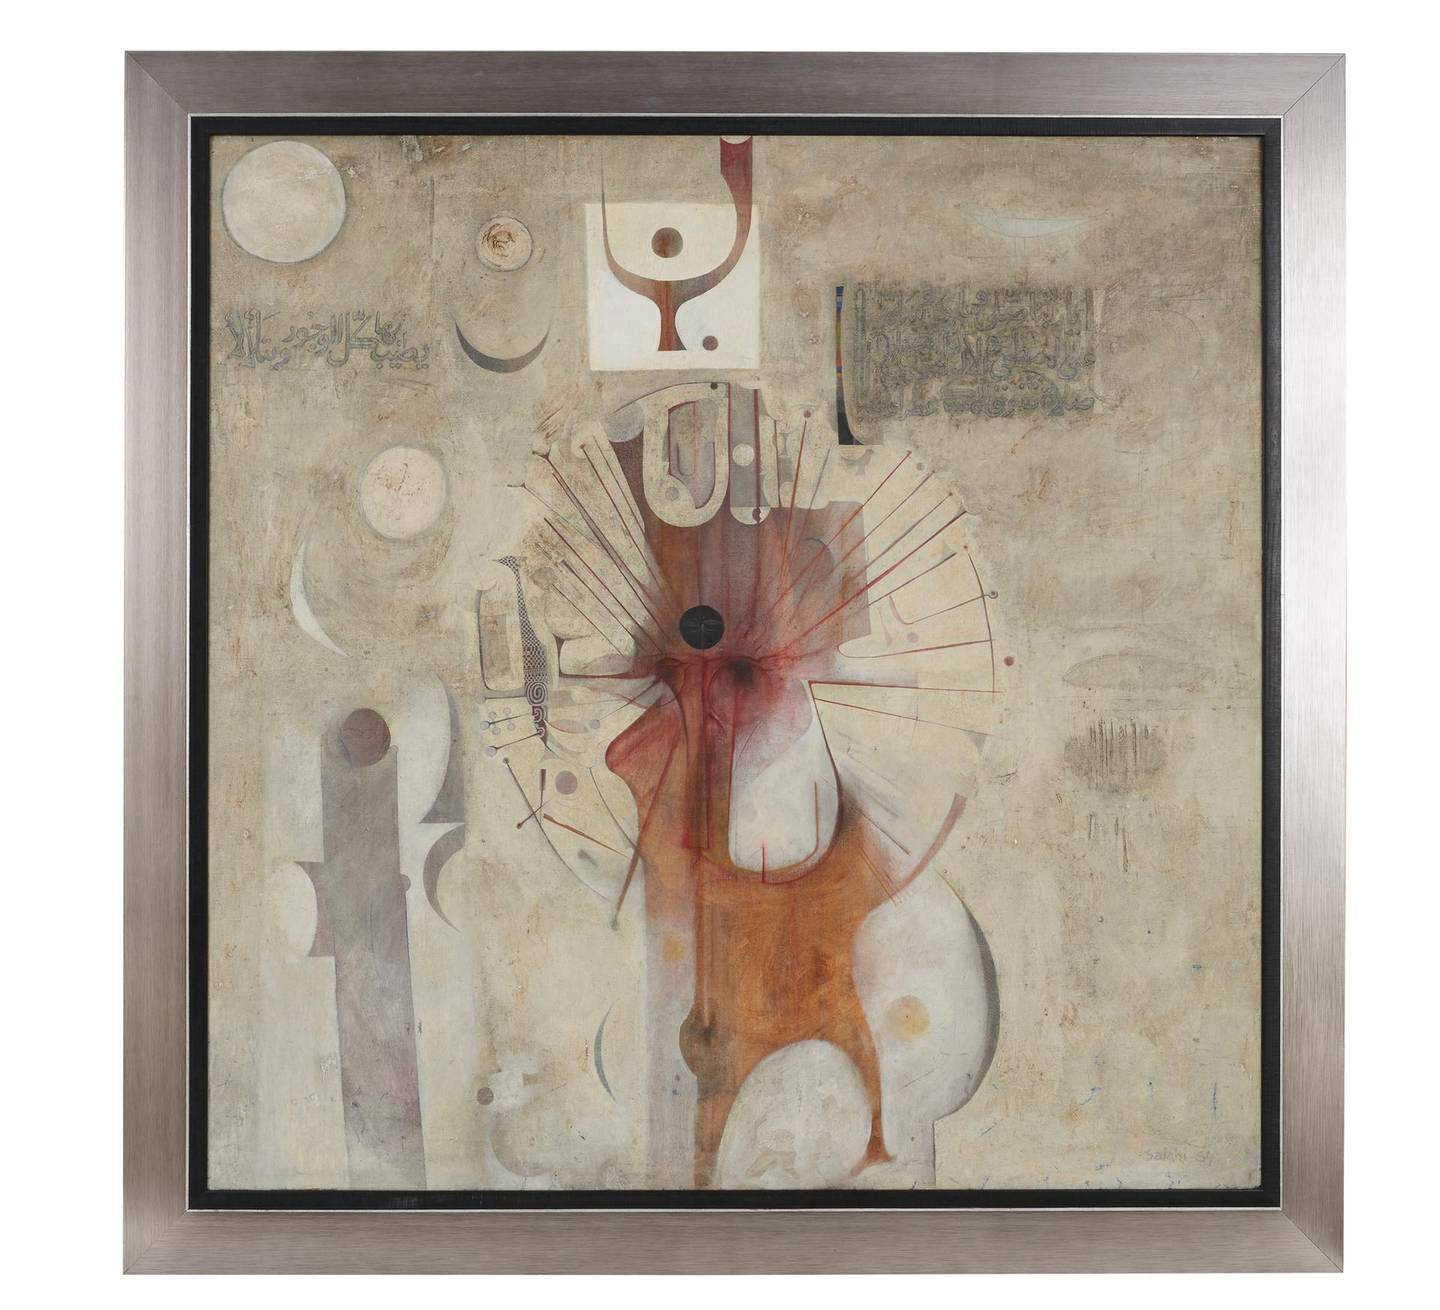 Sudanese artist Ibrahim El-Salai's 'The Last Sound' (1954) is among the pieces on show. Courtesy Barjeel Art Foundation